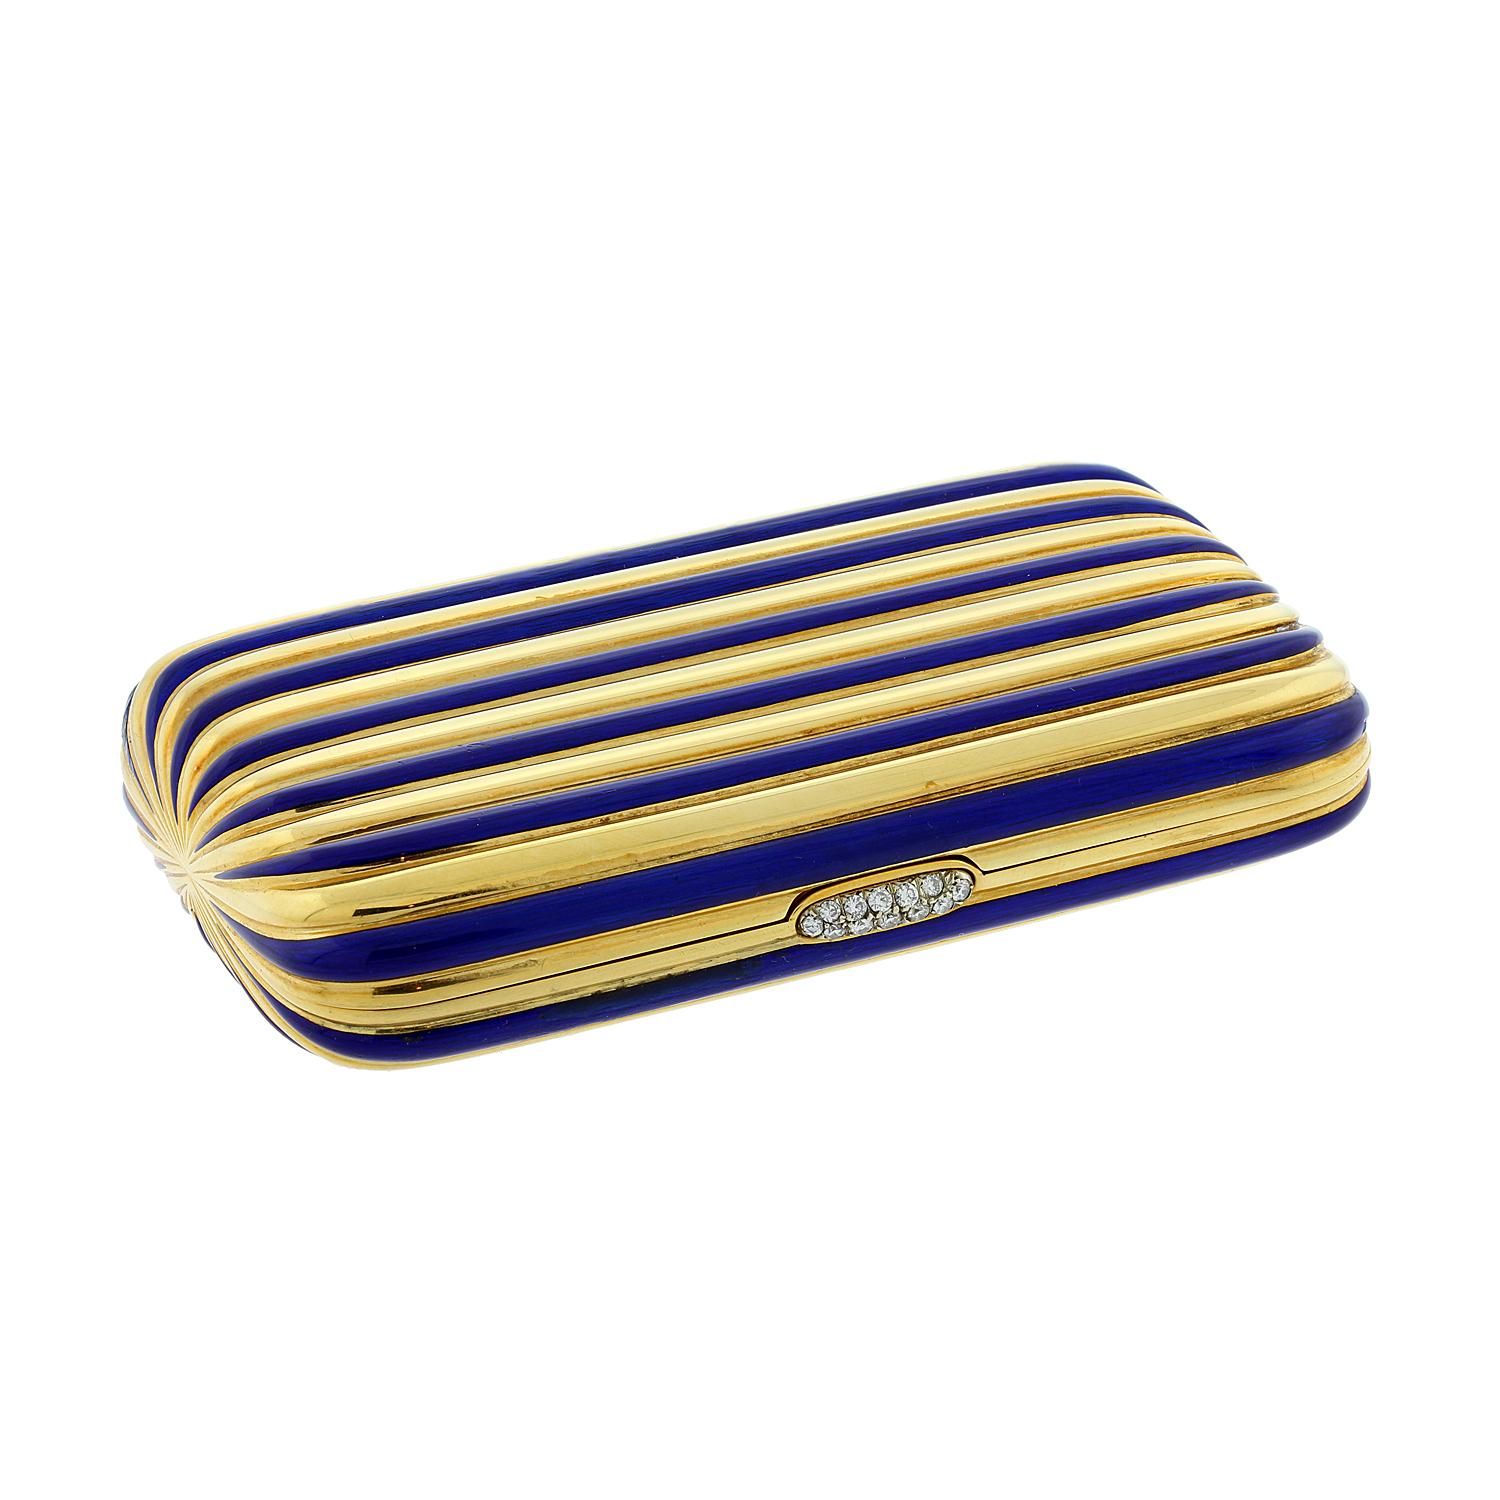 This exceptional compact features a striped design in 18K yellow gold and vibrant blue enamel. The case opens with a press on the diamond clasp.  Inside features a clean yellow gold striped design.  As a multi-use case it can be used to hold cards,